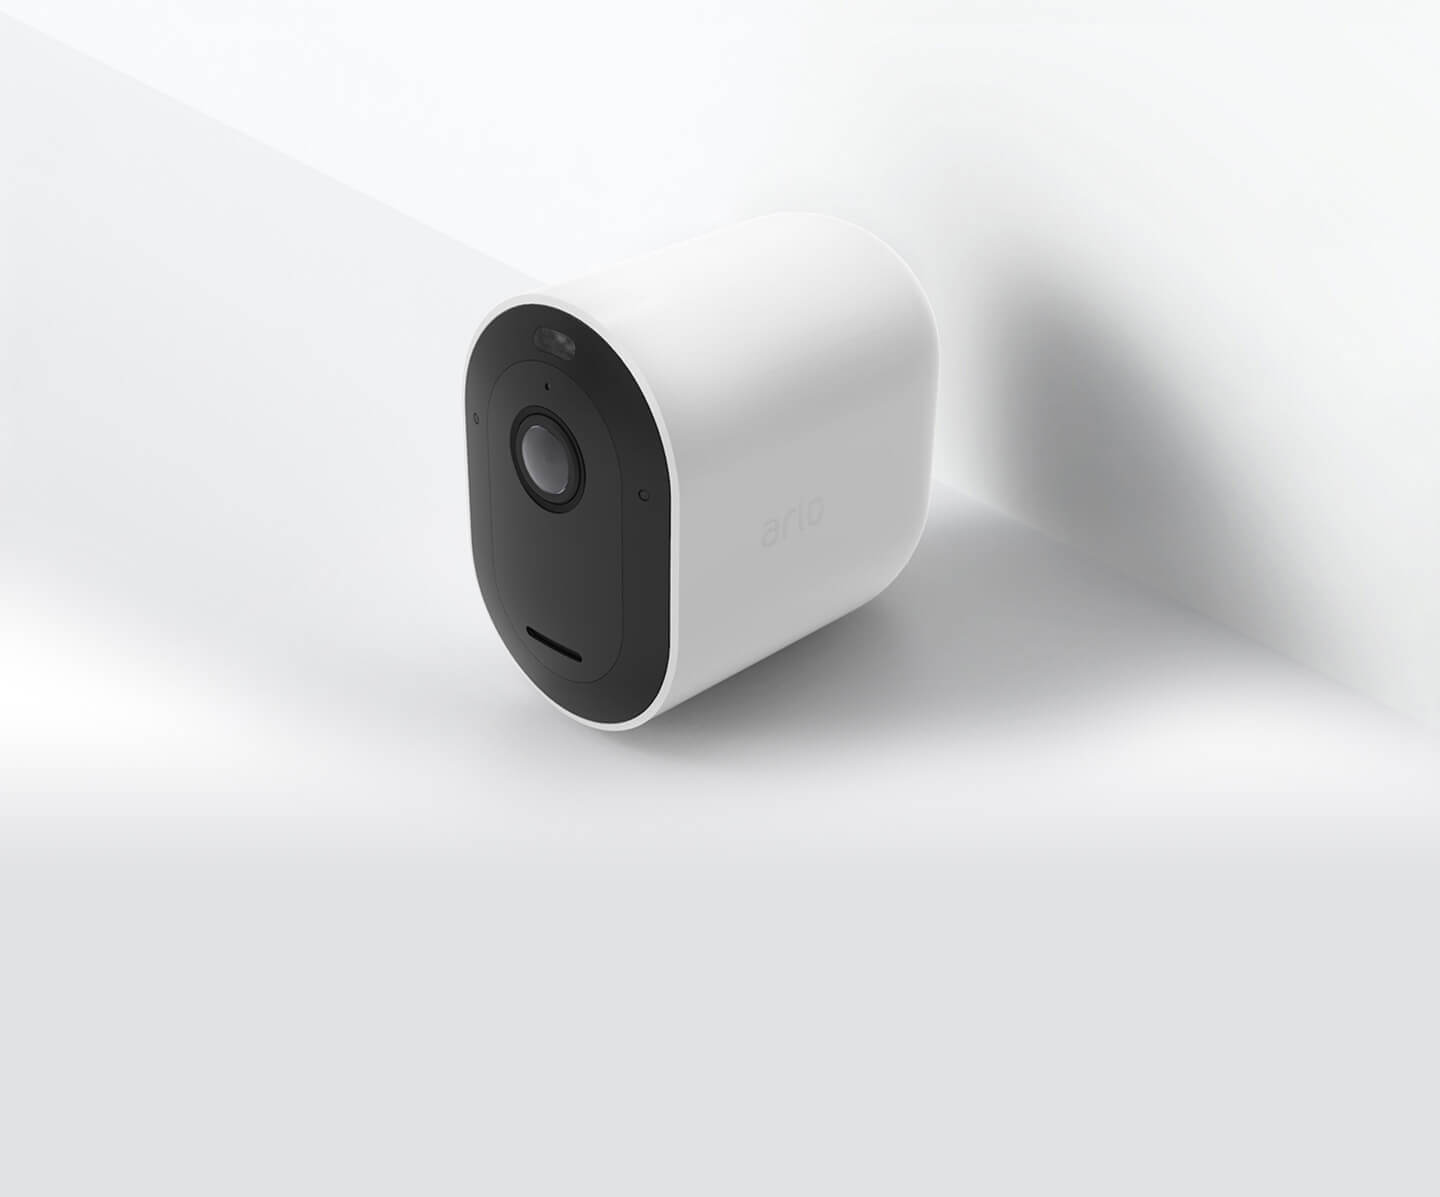 A wireless security camera you can easily install in minutes